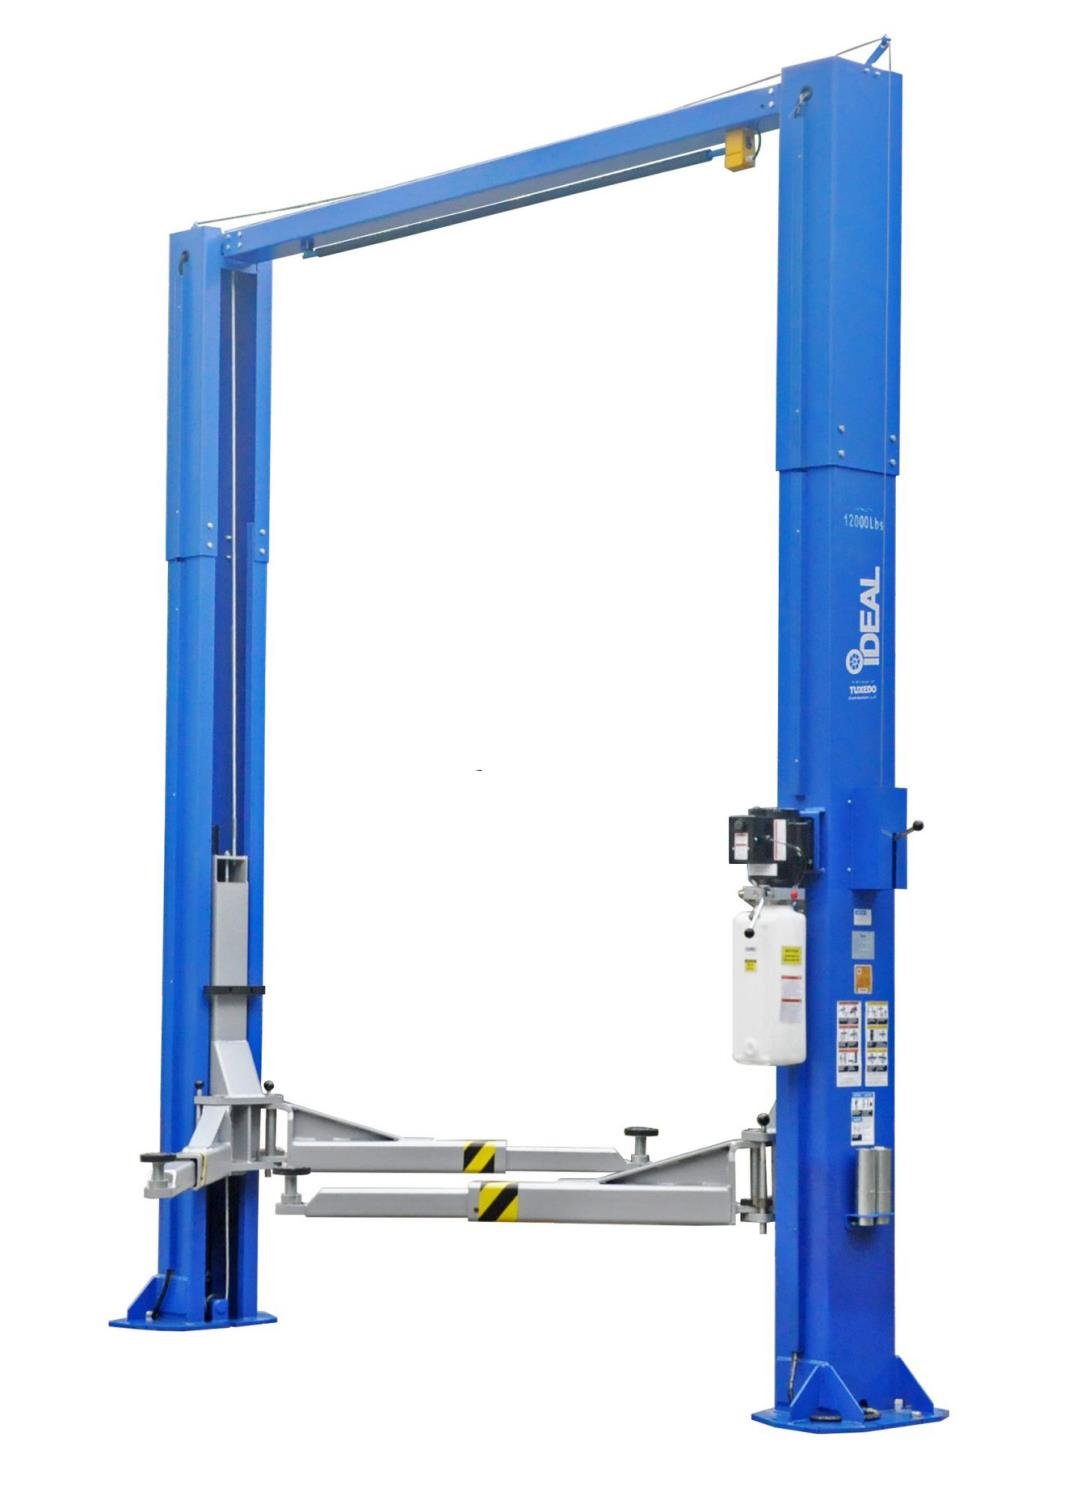 2-Post Symmetric Automotive Lift with 12,000 lbs. Lifting Capacity with Clear Floor